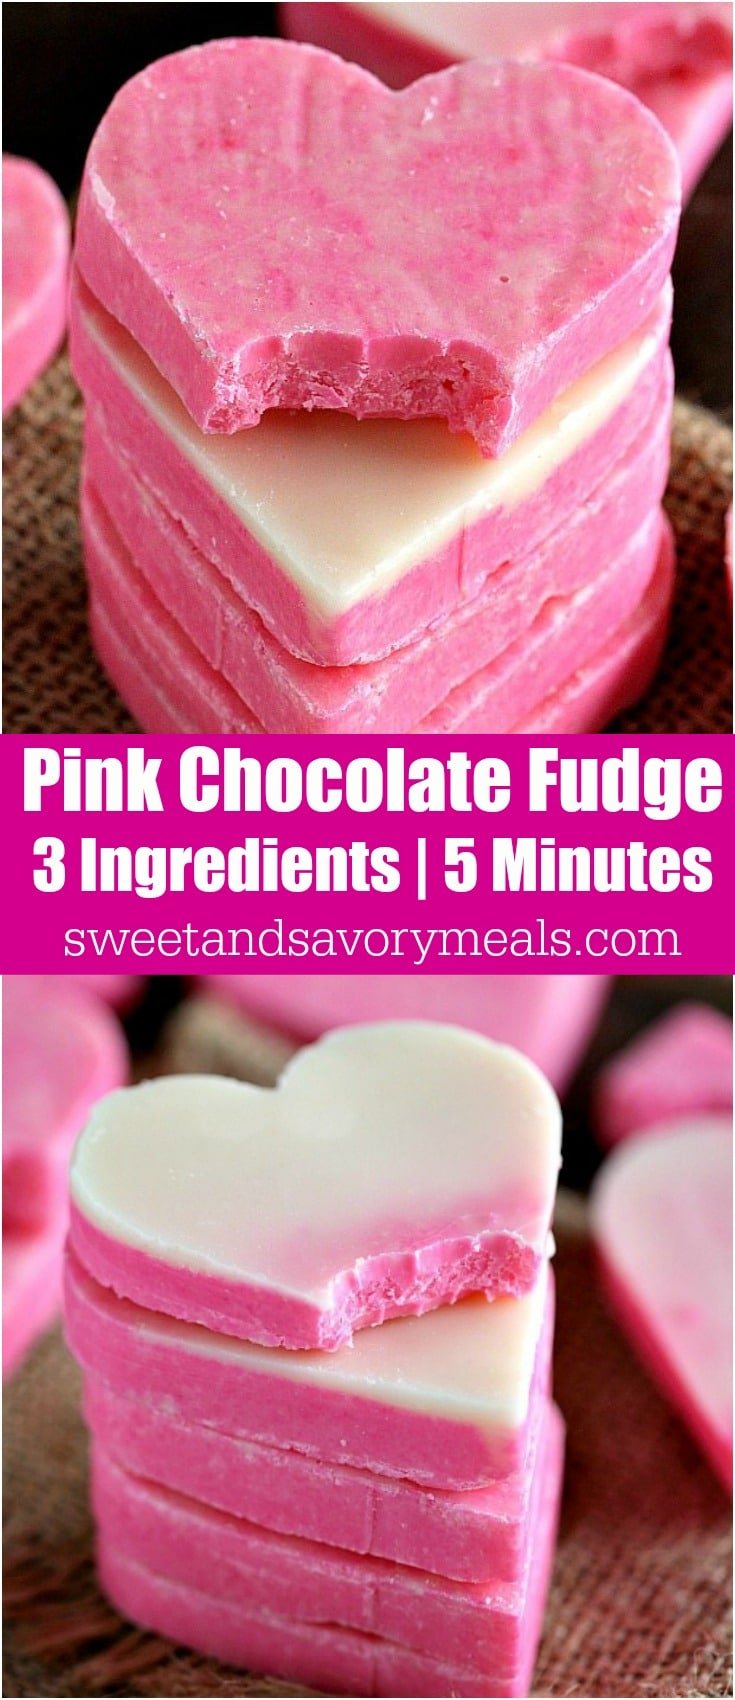 No Bake Pink White Chocolate Fudge is incredibly easy to make and very festive. 3 Ingredients, 5 minutes to get a creamy and irresistible fudge.